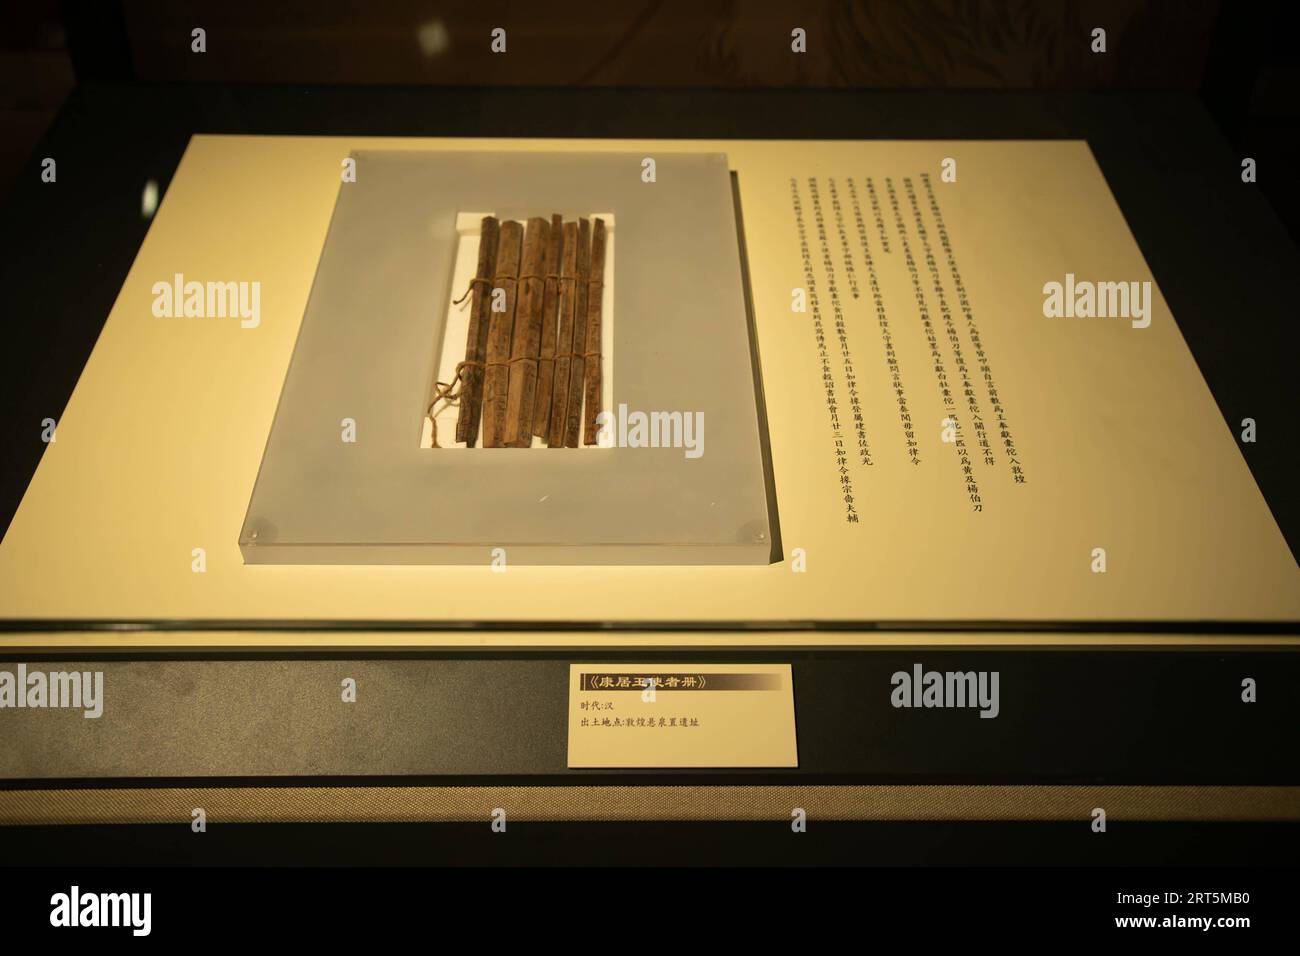 230907 -- LANZHOU, Sept. 7, 2023 -- Bamboo slips are exhibited at the new hall of Gansu bamboo slip museum in Lanzhou, northwest China s Gansu Province, Sept. 7, 2023. The new hall of a bamboo slip museum in Gansu opened on Thursday, with more than 1,000 ancient bamboo slips on display. Most of these slips are being showcased for the first time since they were discovered, including those dating back some 2,000 years to the Han Dynasty 202 BC-AD 220. Located along the Hexi Corridor, part of the ancient Silk Road in northwest China, Gansu has a dry climate, and therefore, the ancient bamboo slip Stock Photo